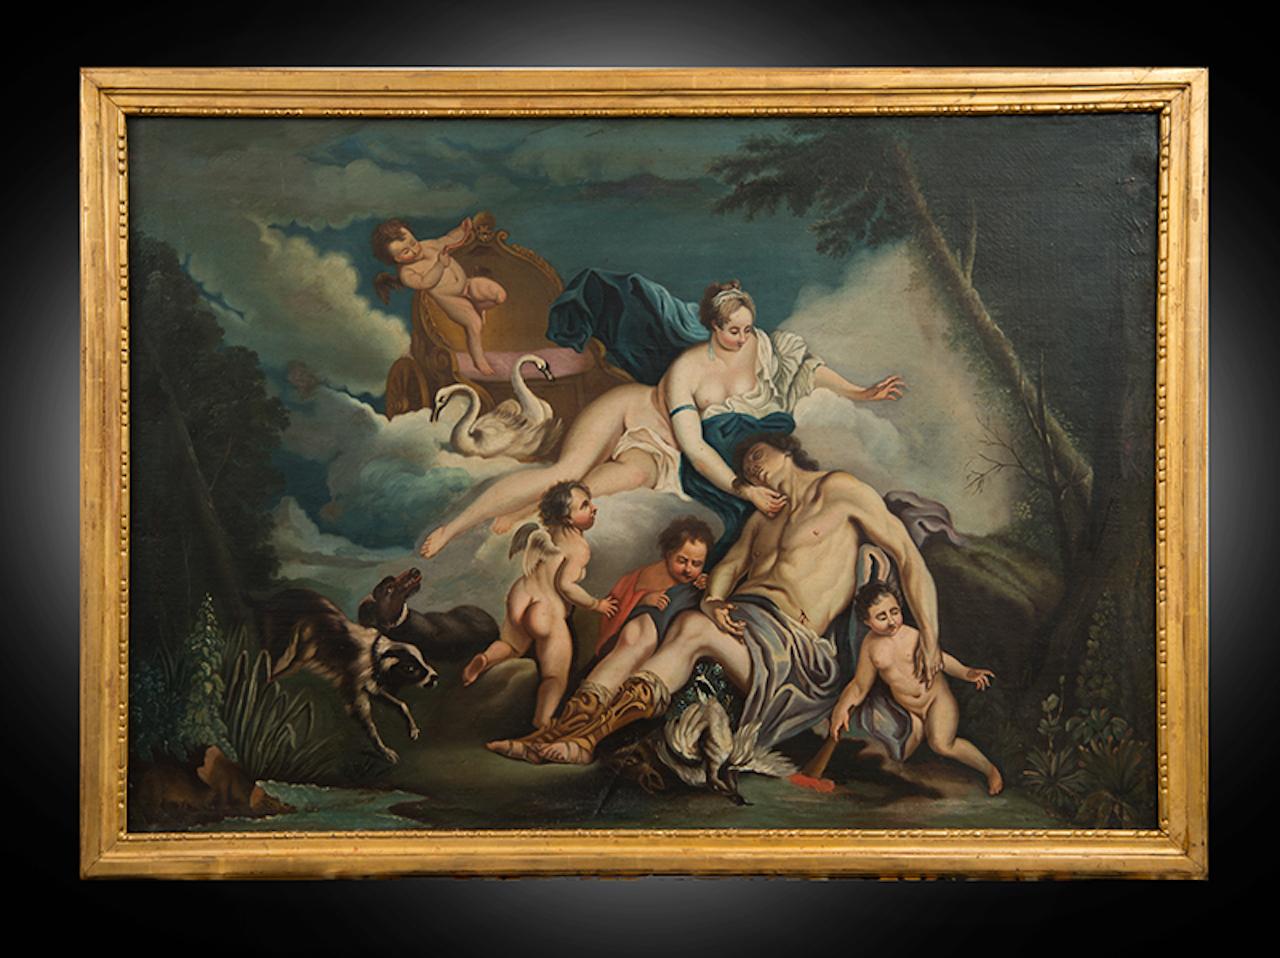 Unknown Figurative Painting - Antique oil on canvas painting depicting Venus and Adonis coveted "Boucher." France